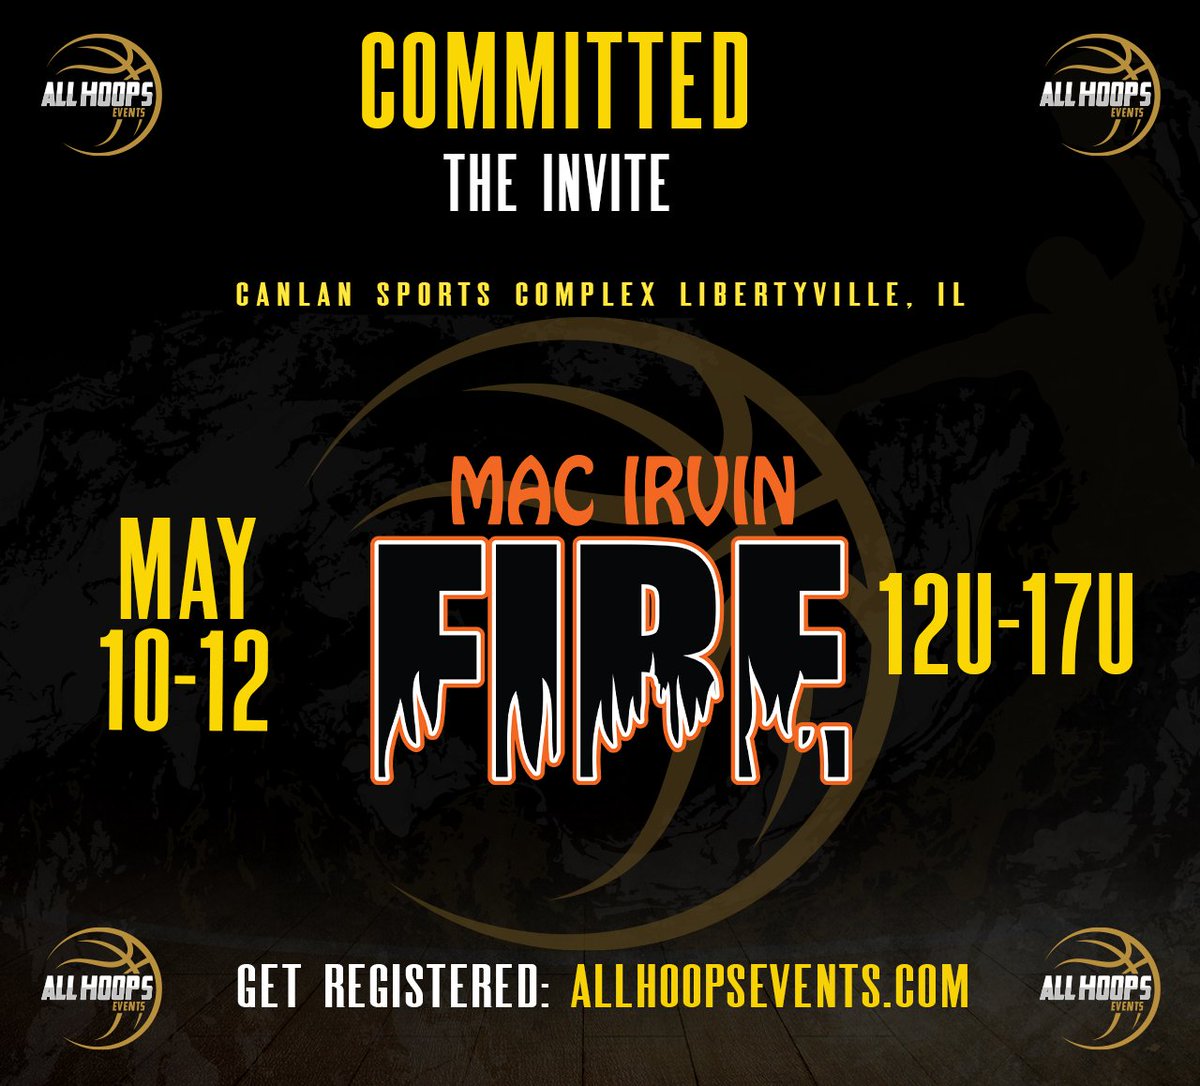 allhoopsevents (@allhoopsevents) on Twitter photo 2024-04-25 22:20:17